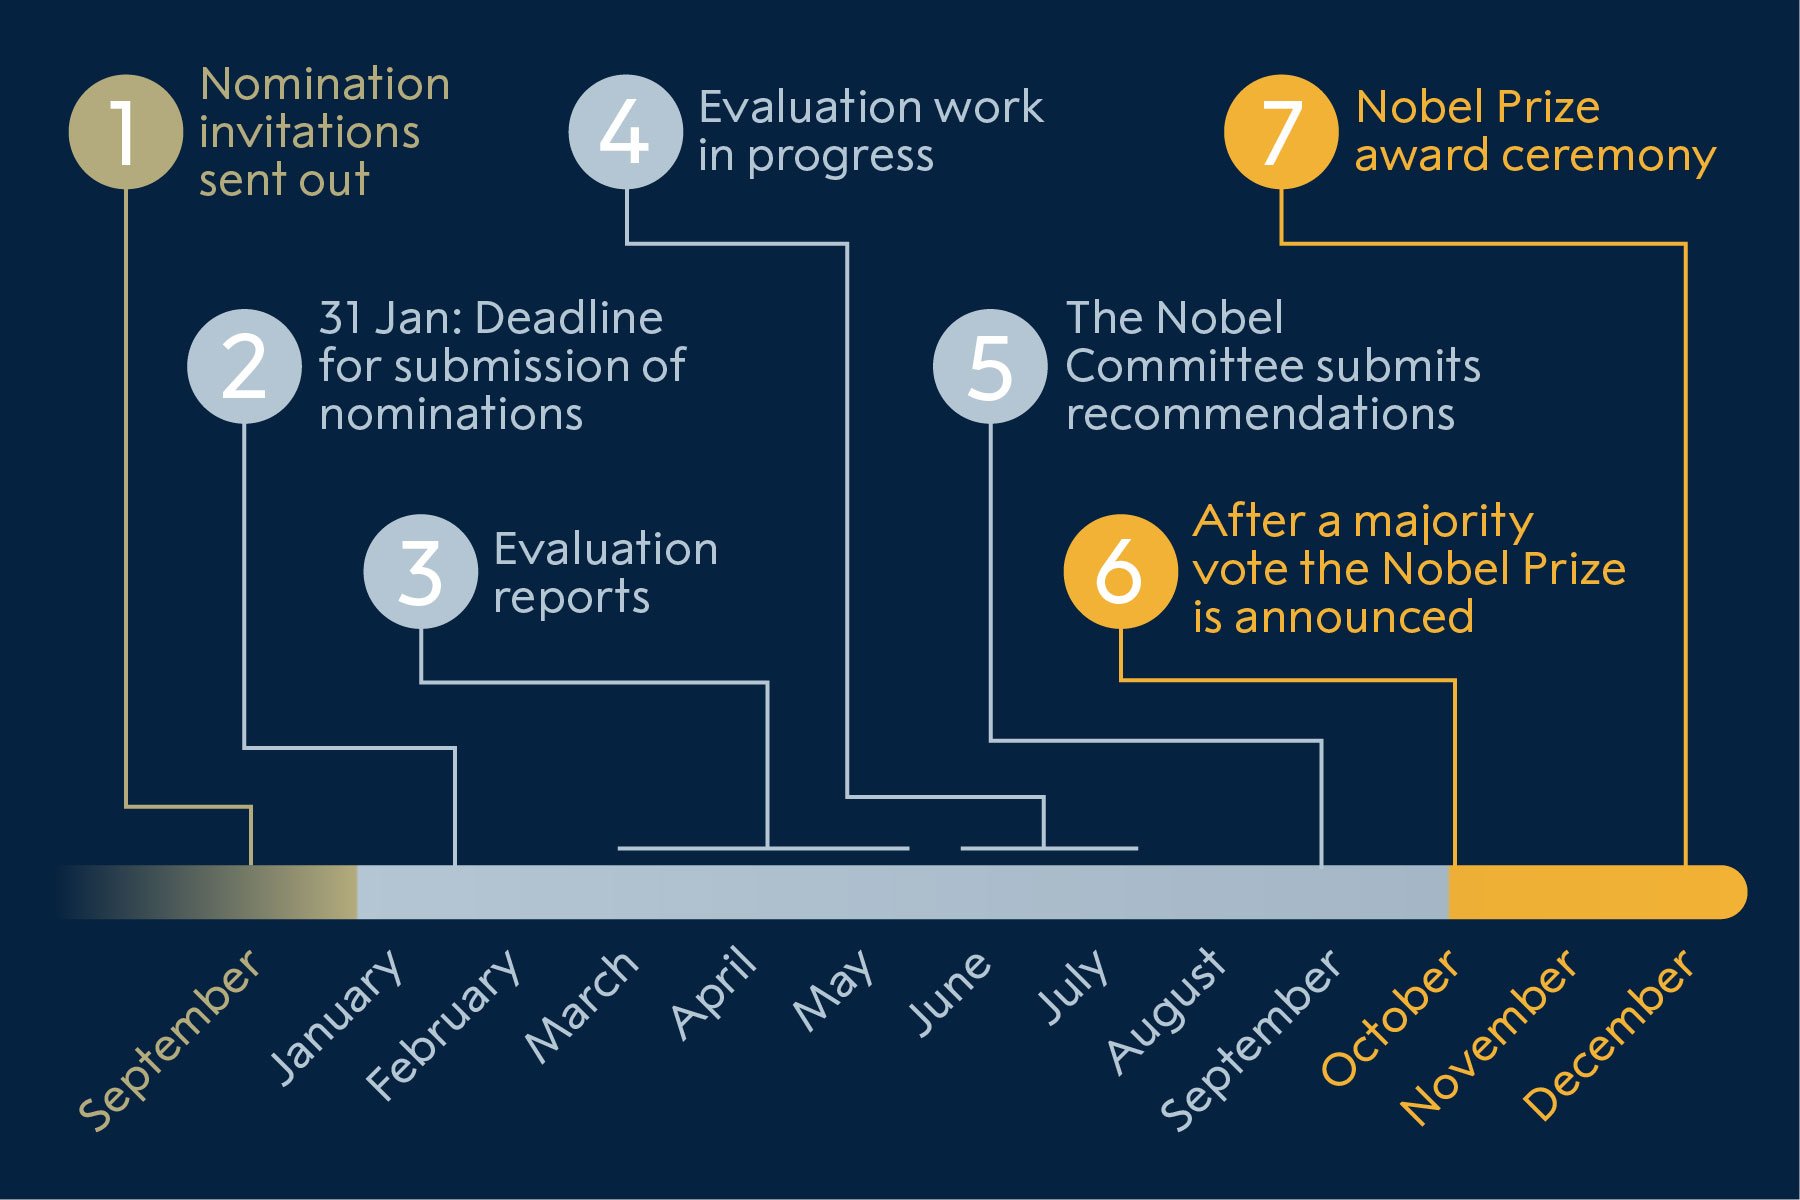 The nomination process for Nobel Laureates in Physiology or Medicine